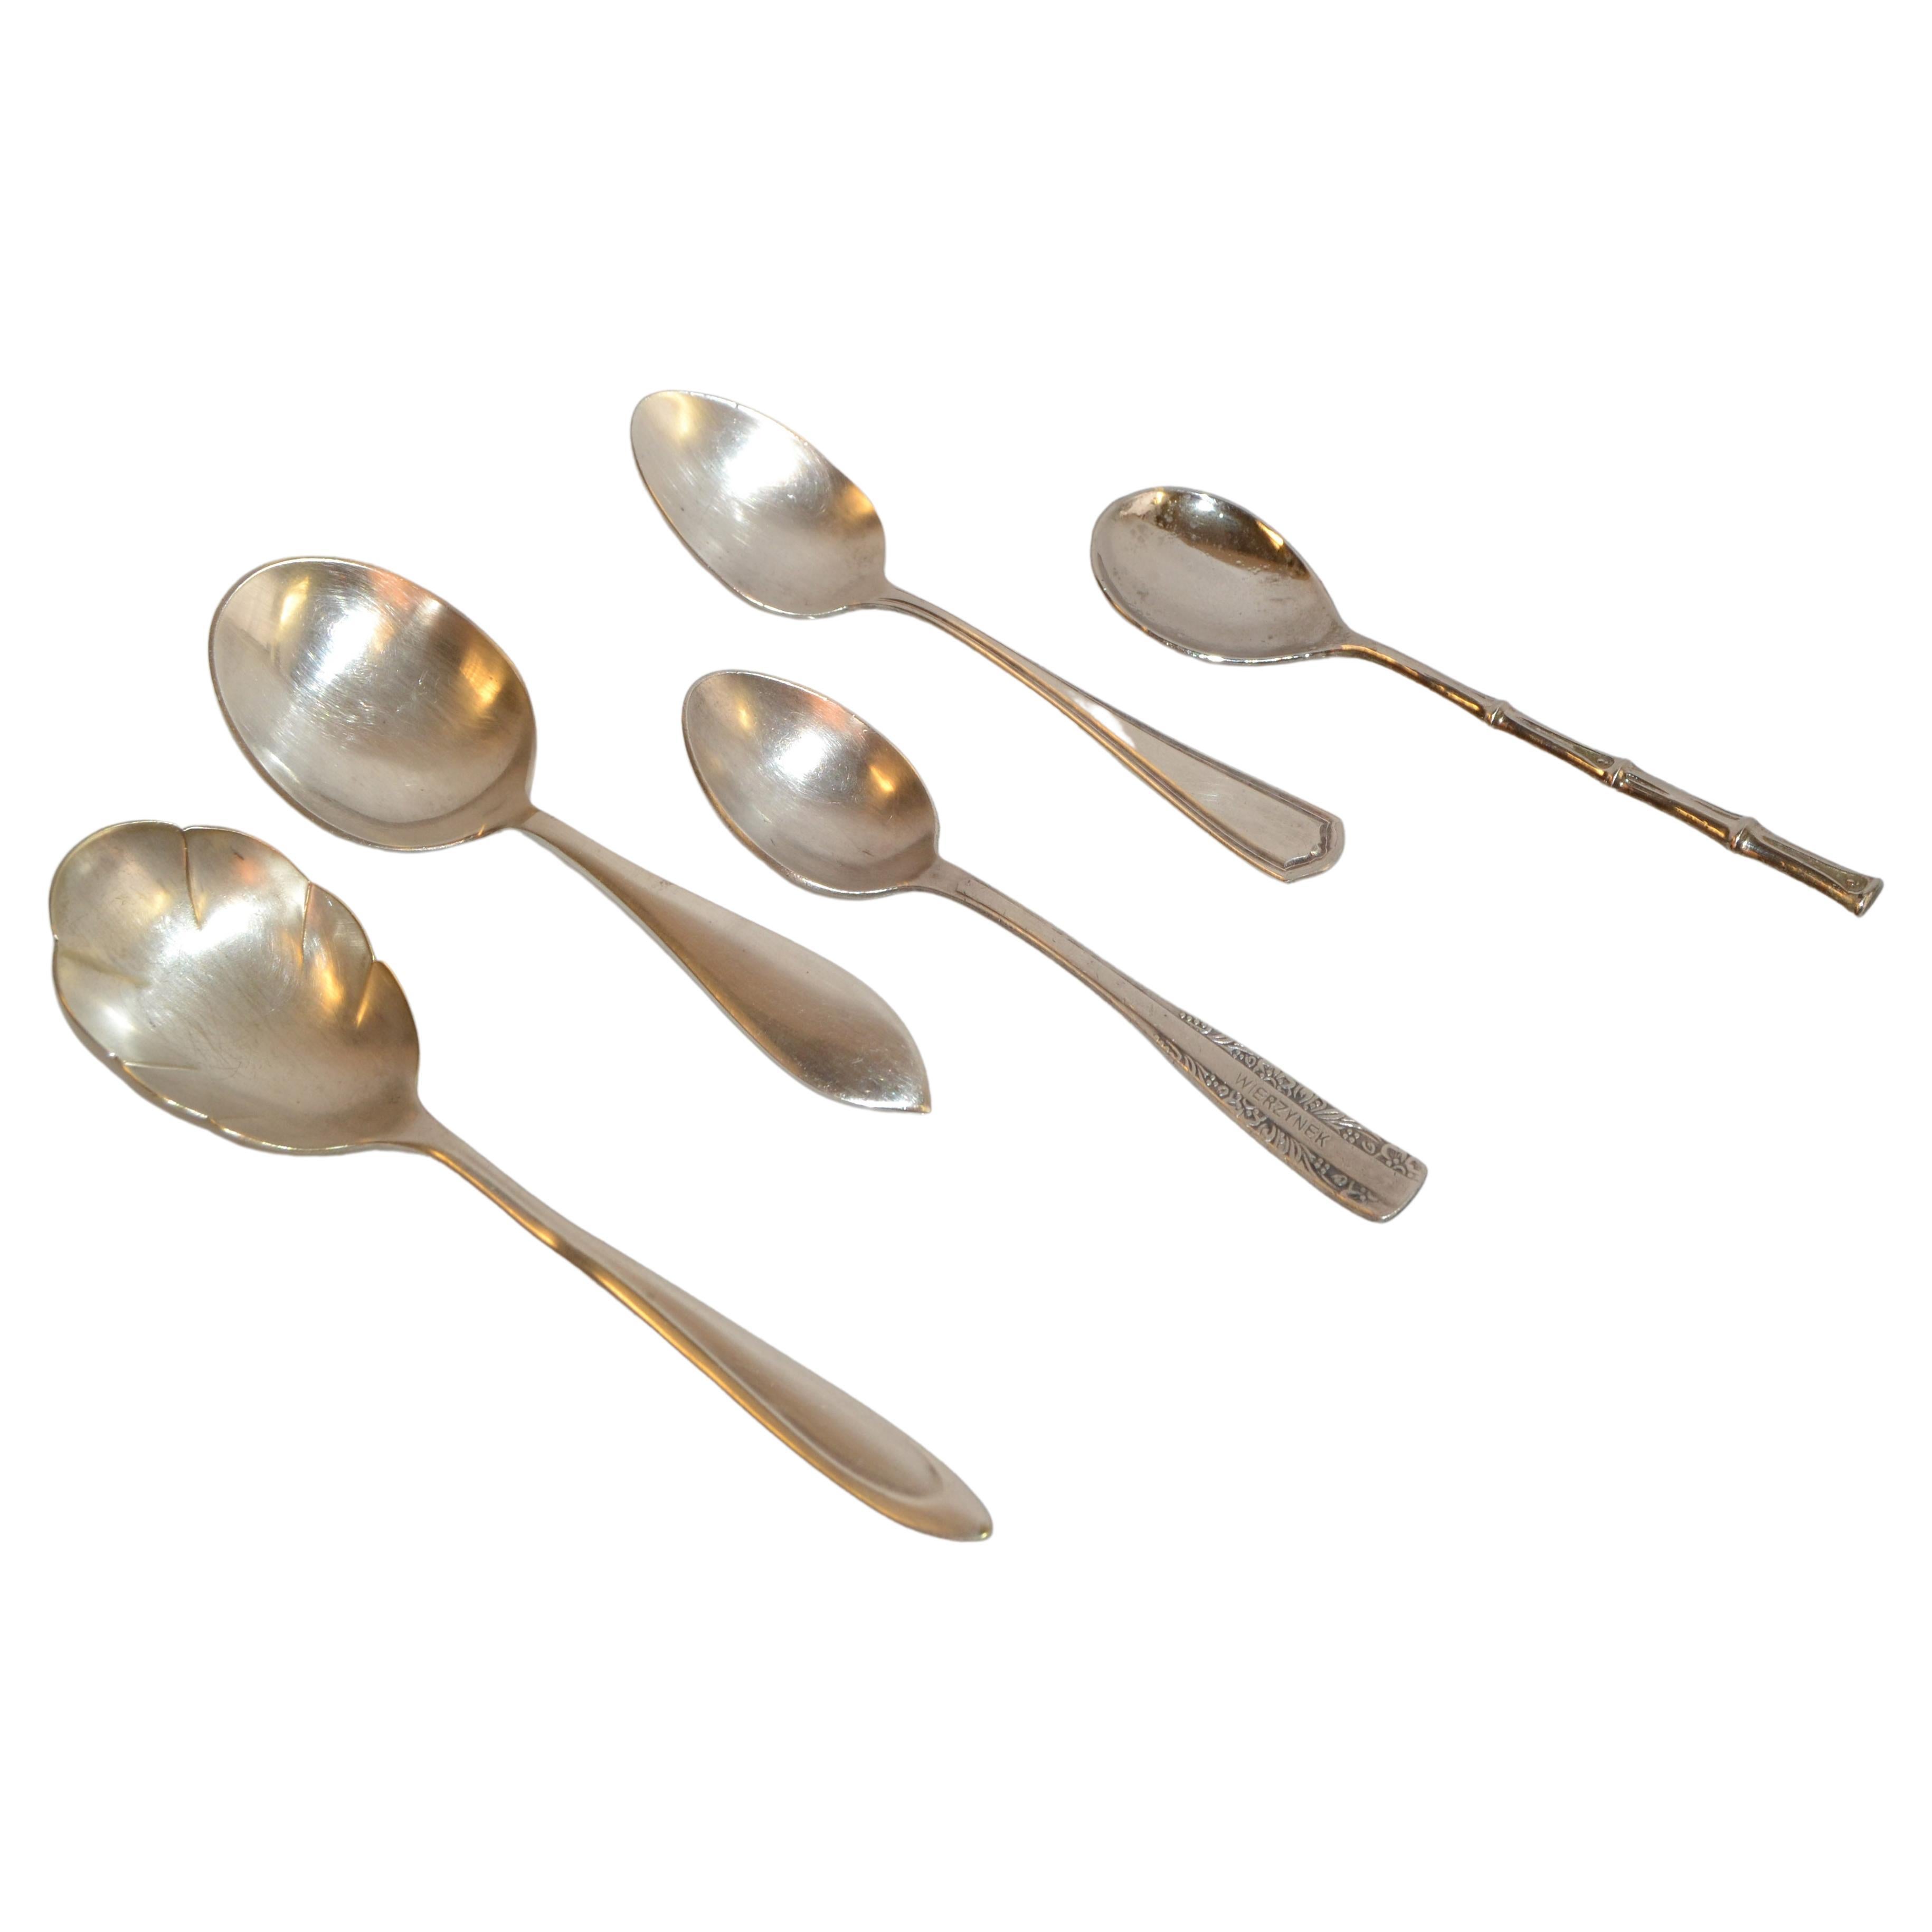 Marvelous Set of 5 Teaspoons or Baby Spoons collected during my Travel Years through Europe and the United States. All Spoons are marked and four are Silver Plate and one is Silver, marked Sterling.
Set is consisting of first the oldest Sugar